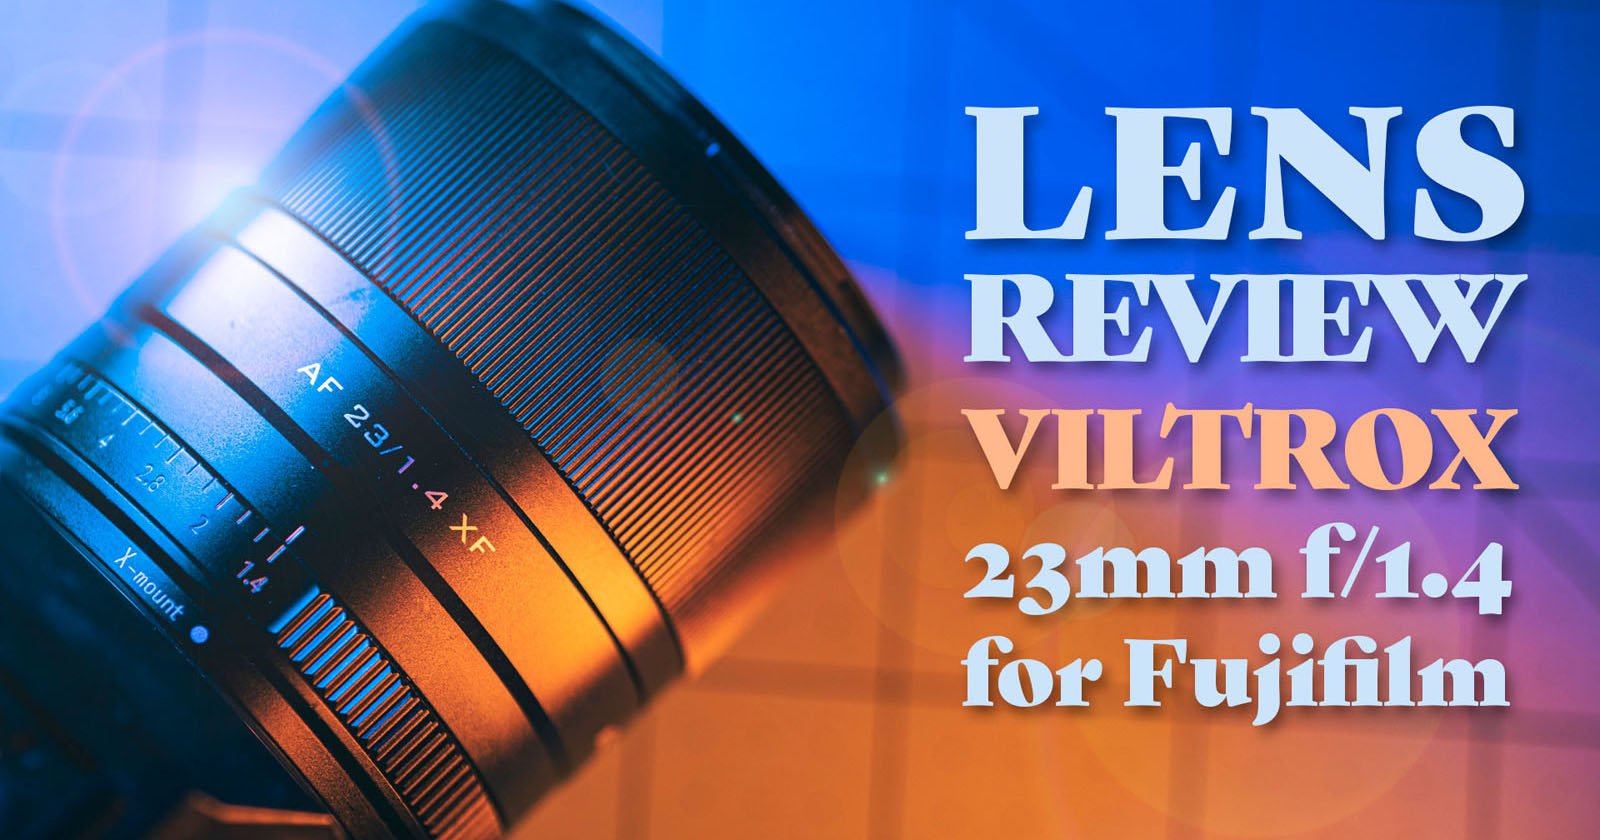 Review: The Viltrox AF 23mm f/1.4 for Fujifilm X is a Superb Value